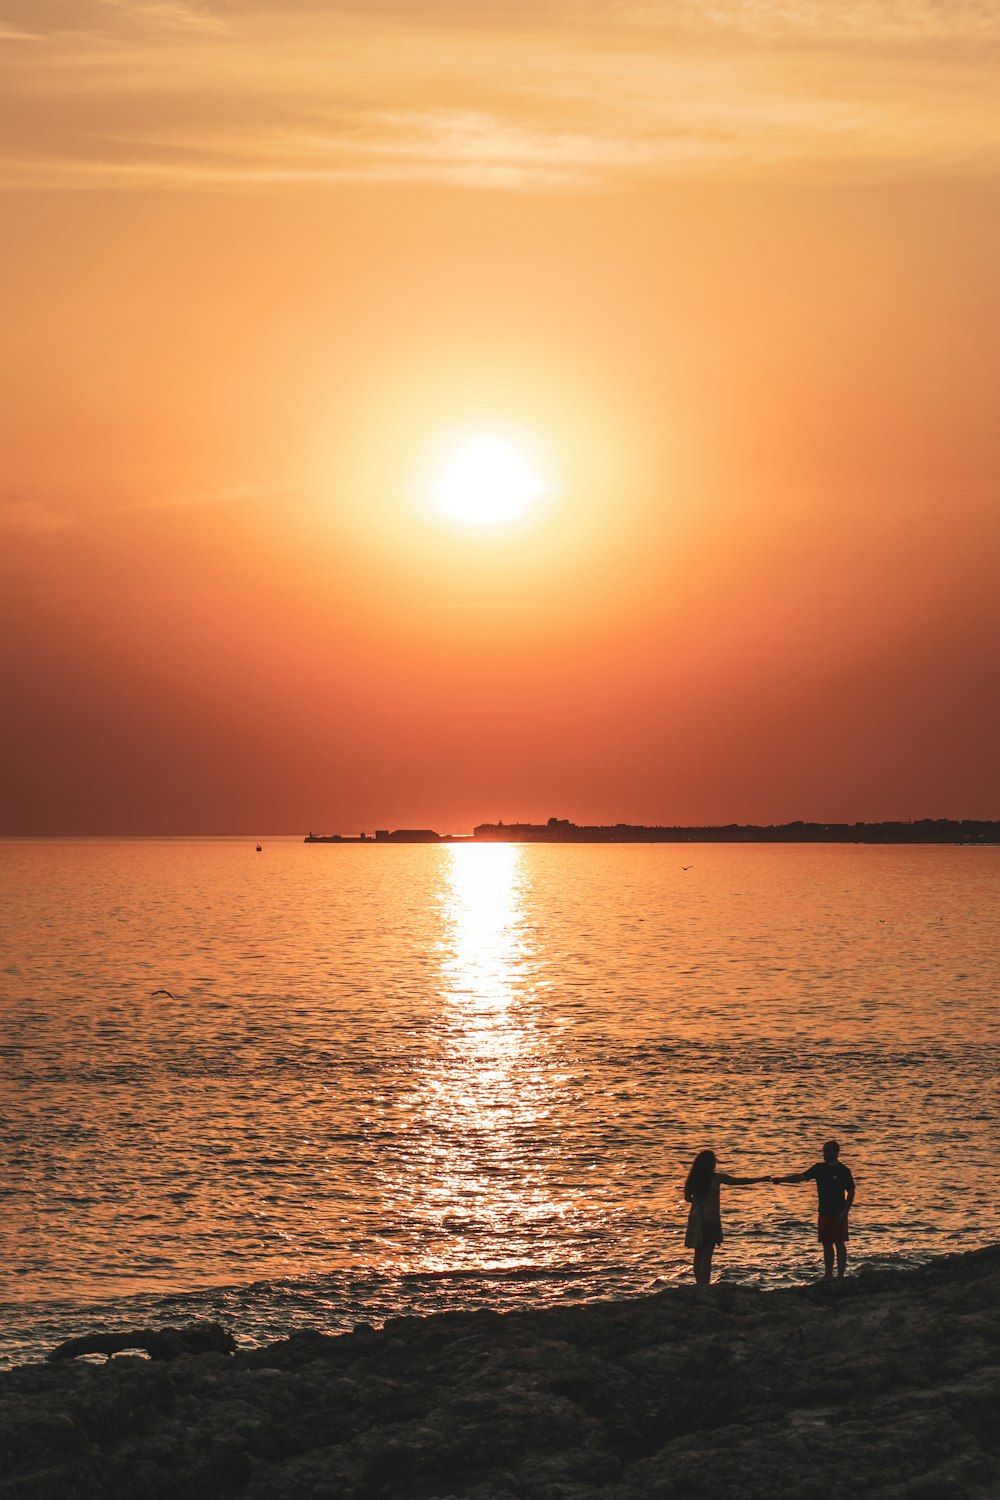 A couple of people fishing in the water at sunset photo – Free Sunset Image  on Unsplash